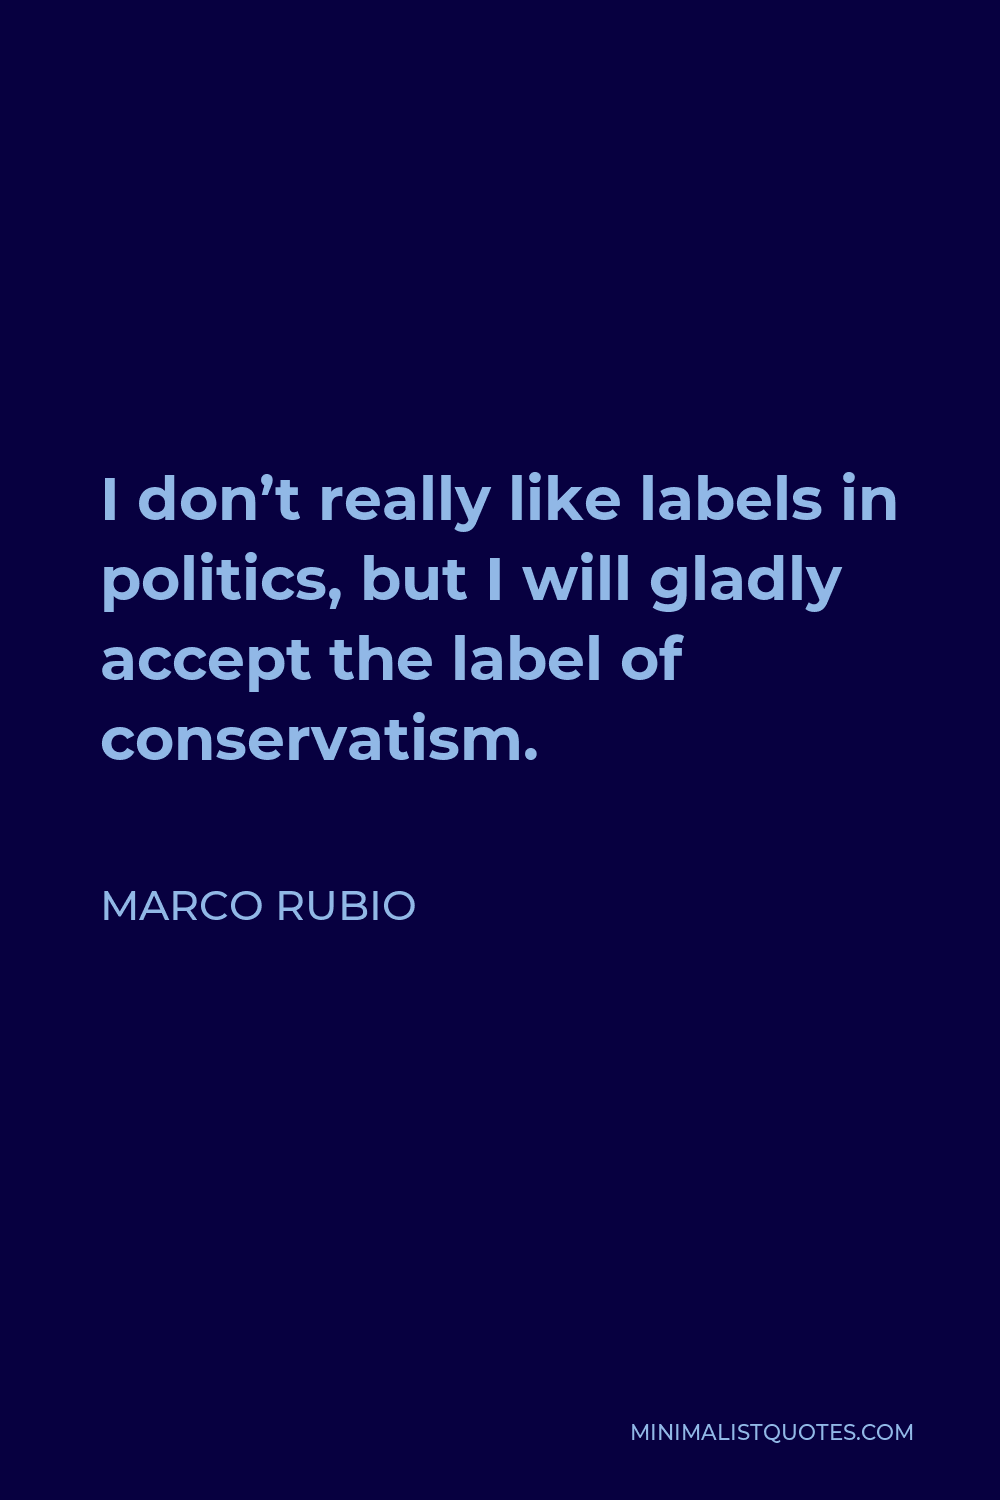 Marco Rubio Quote - I don’t really like labels in politics, but I will gladly accept the label of conservatism.